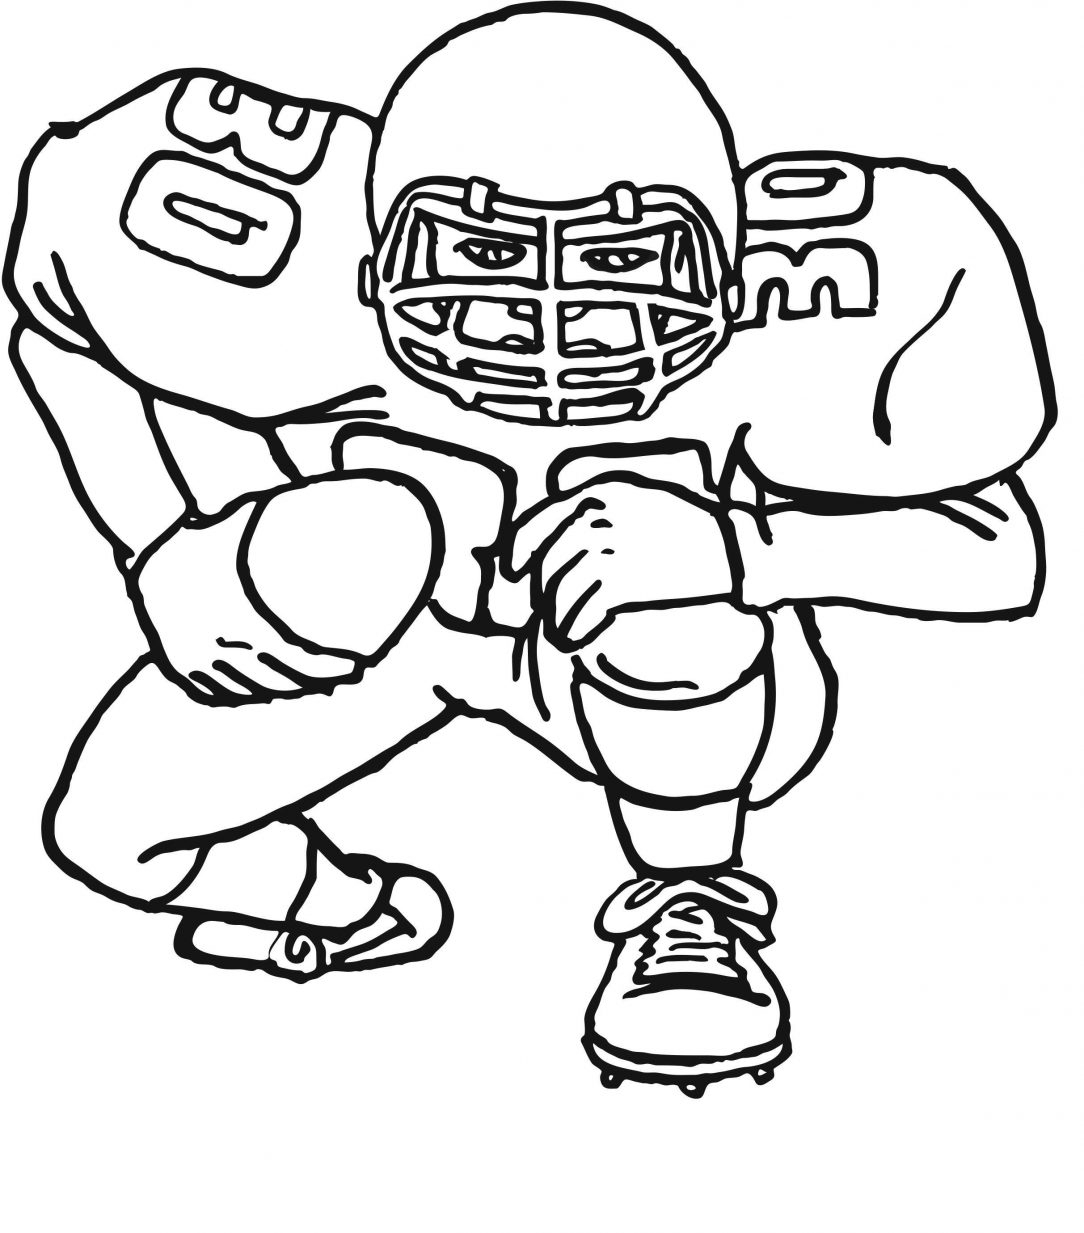 Free Printable Football Helmet Coloring Pages Nfl Michigan Seahawks - Free Printable Seahawks Coloring Pages